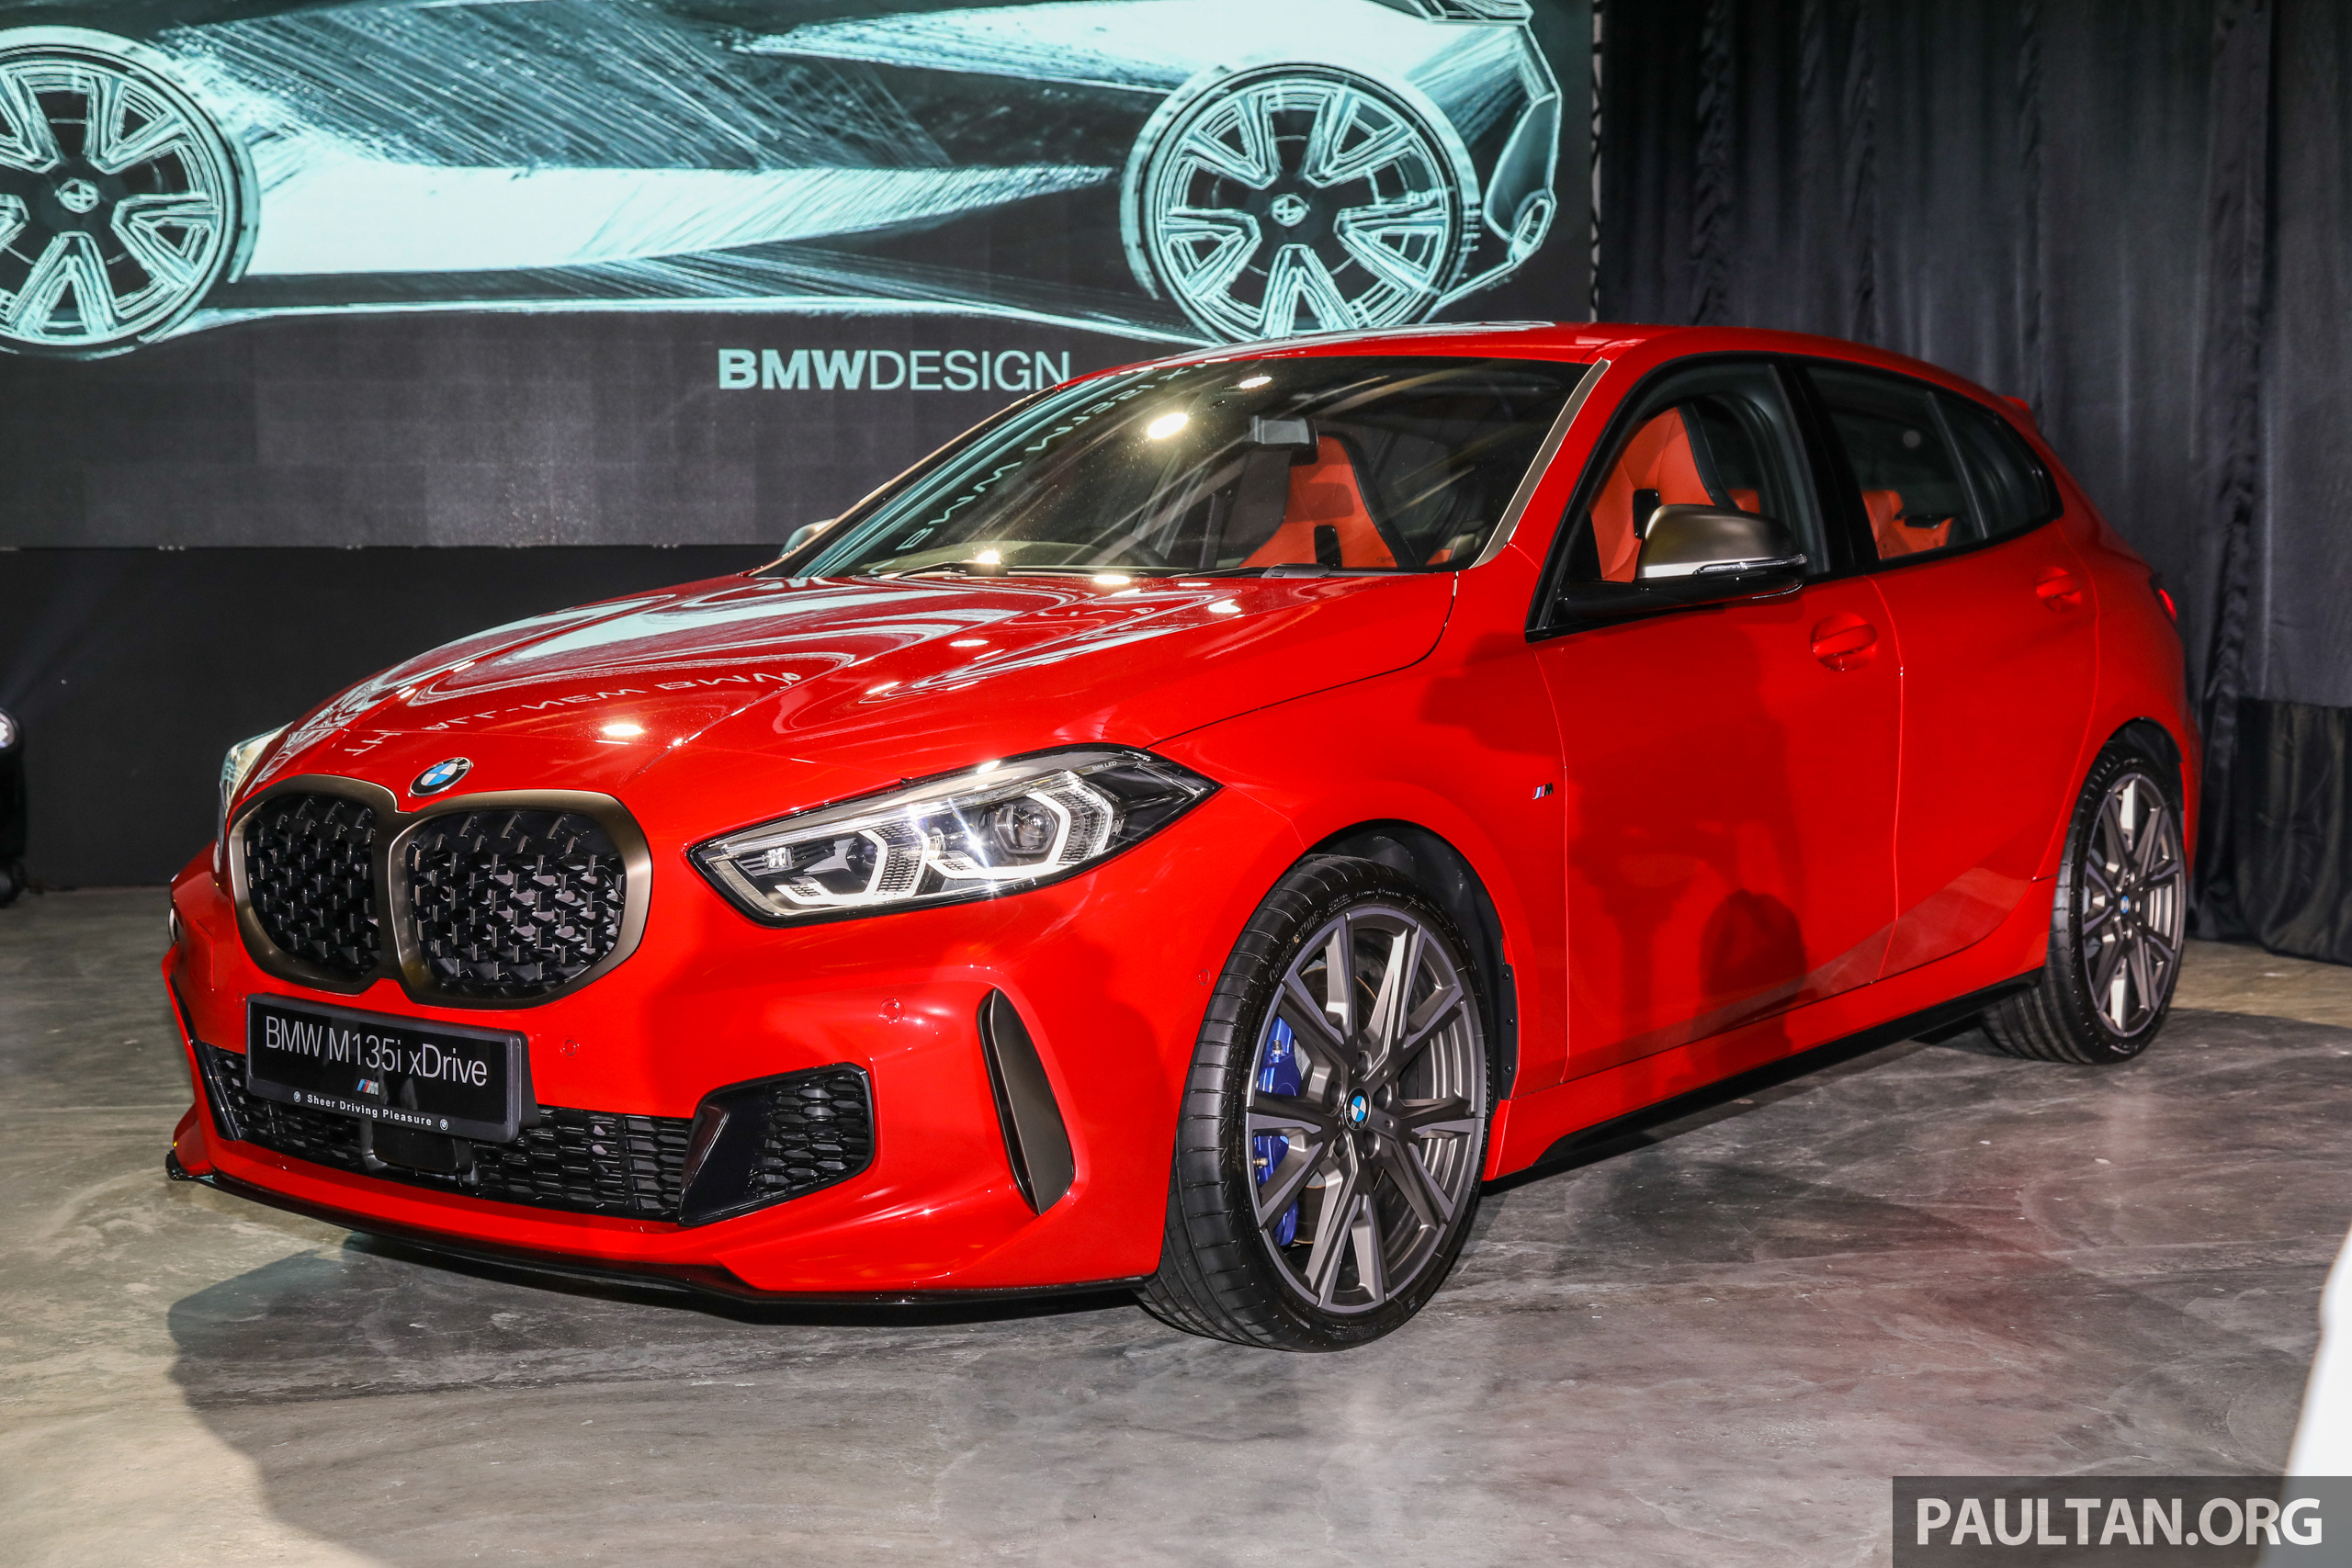 2020 F40 BMW M135i xDrive launched in Malaysia - AMG A35 rival